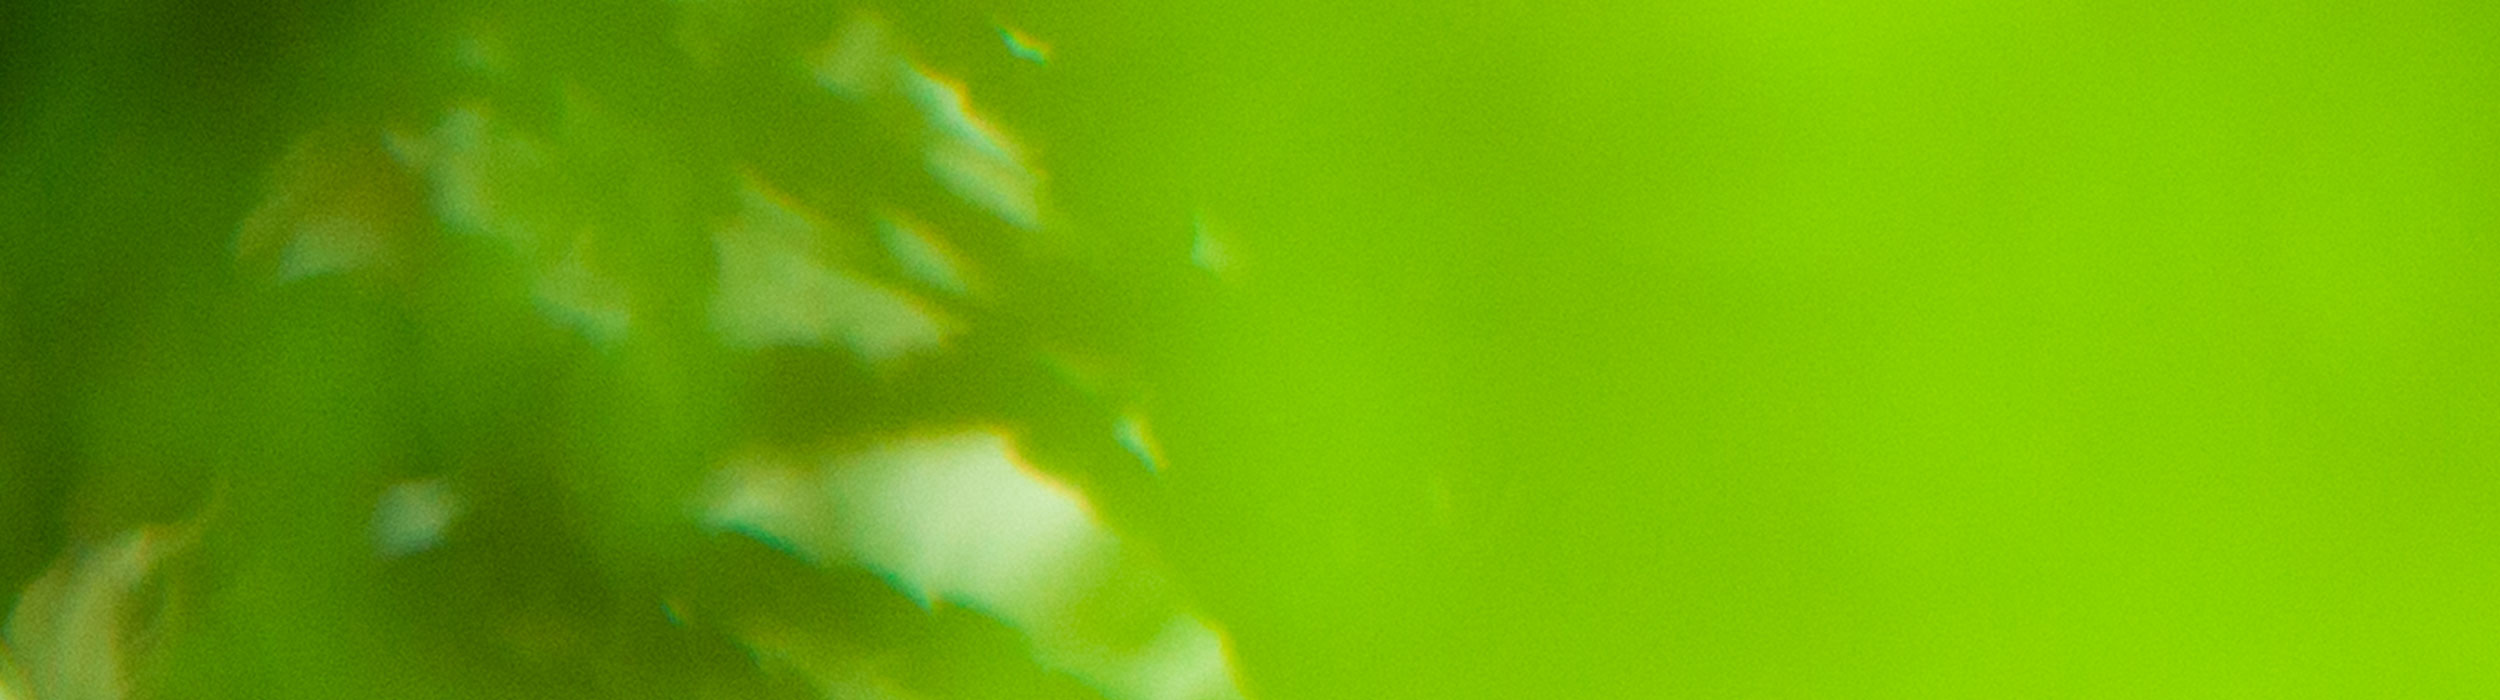 Abstract trees can be seen through a saturated green filter, a visual aesthetic representative of the sound of the album.